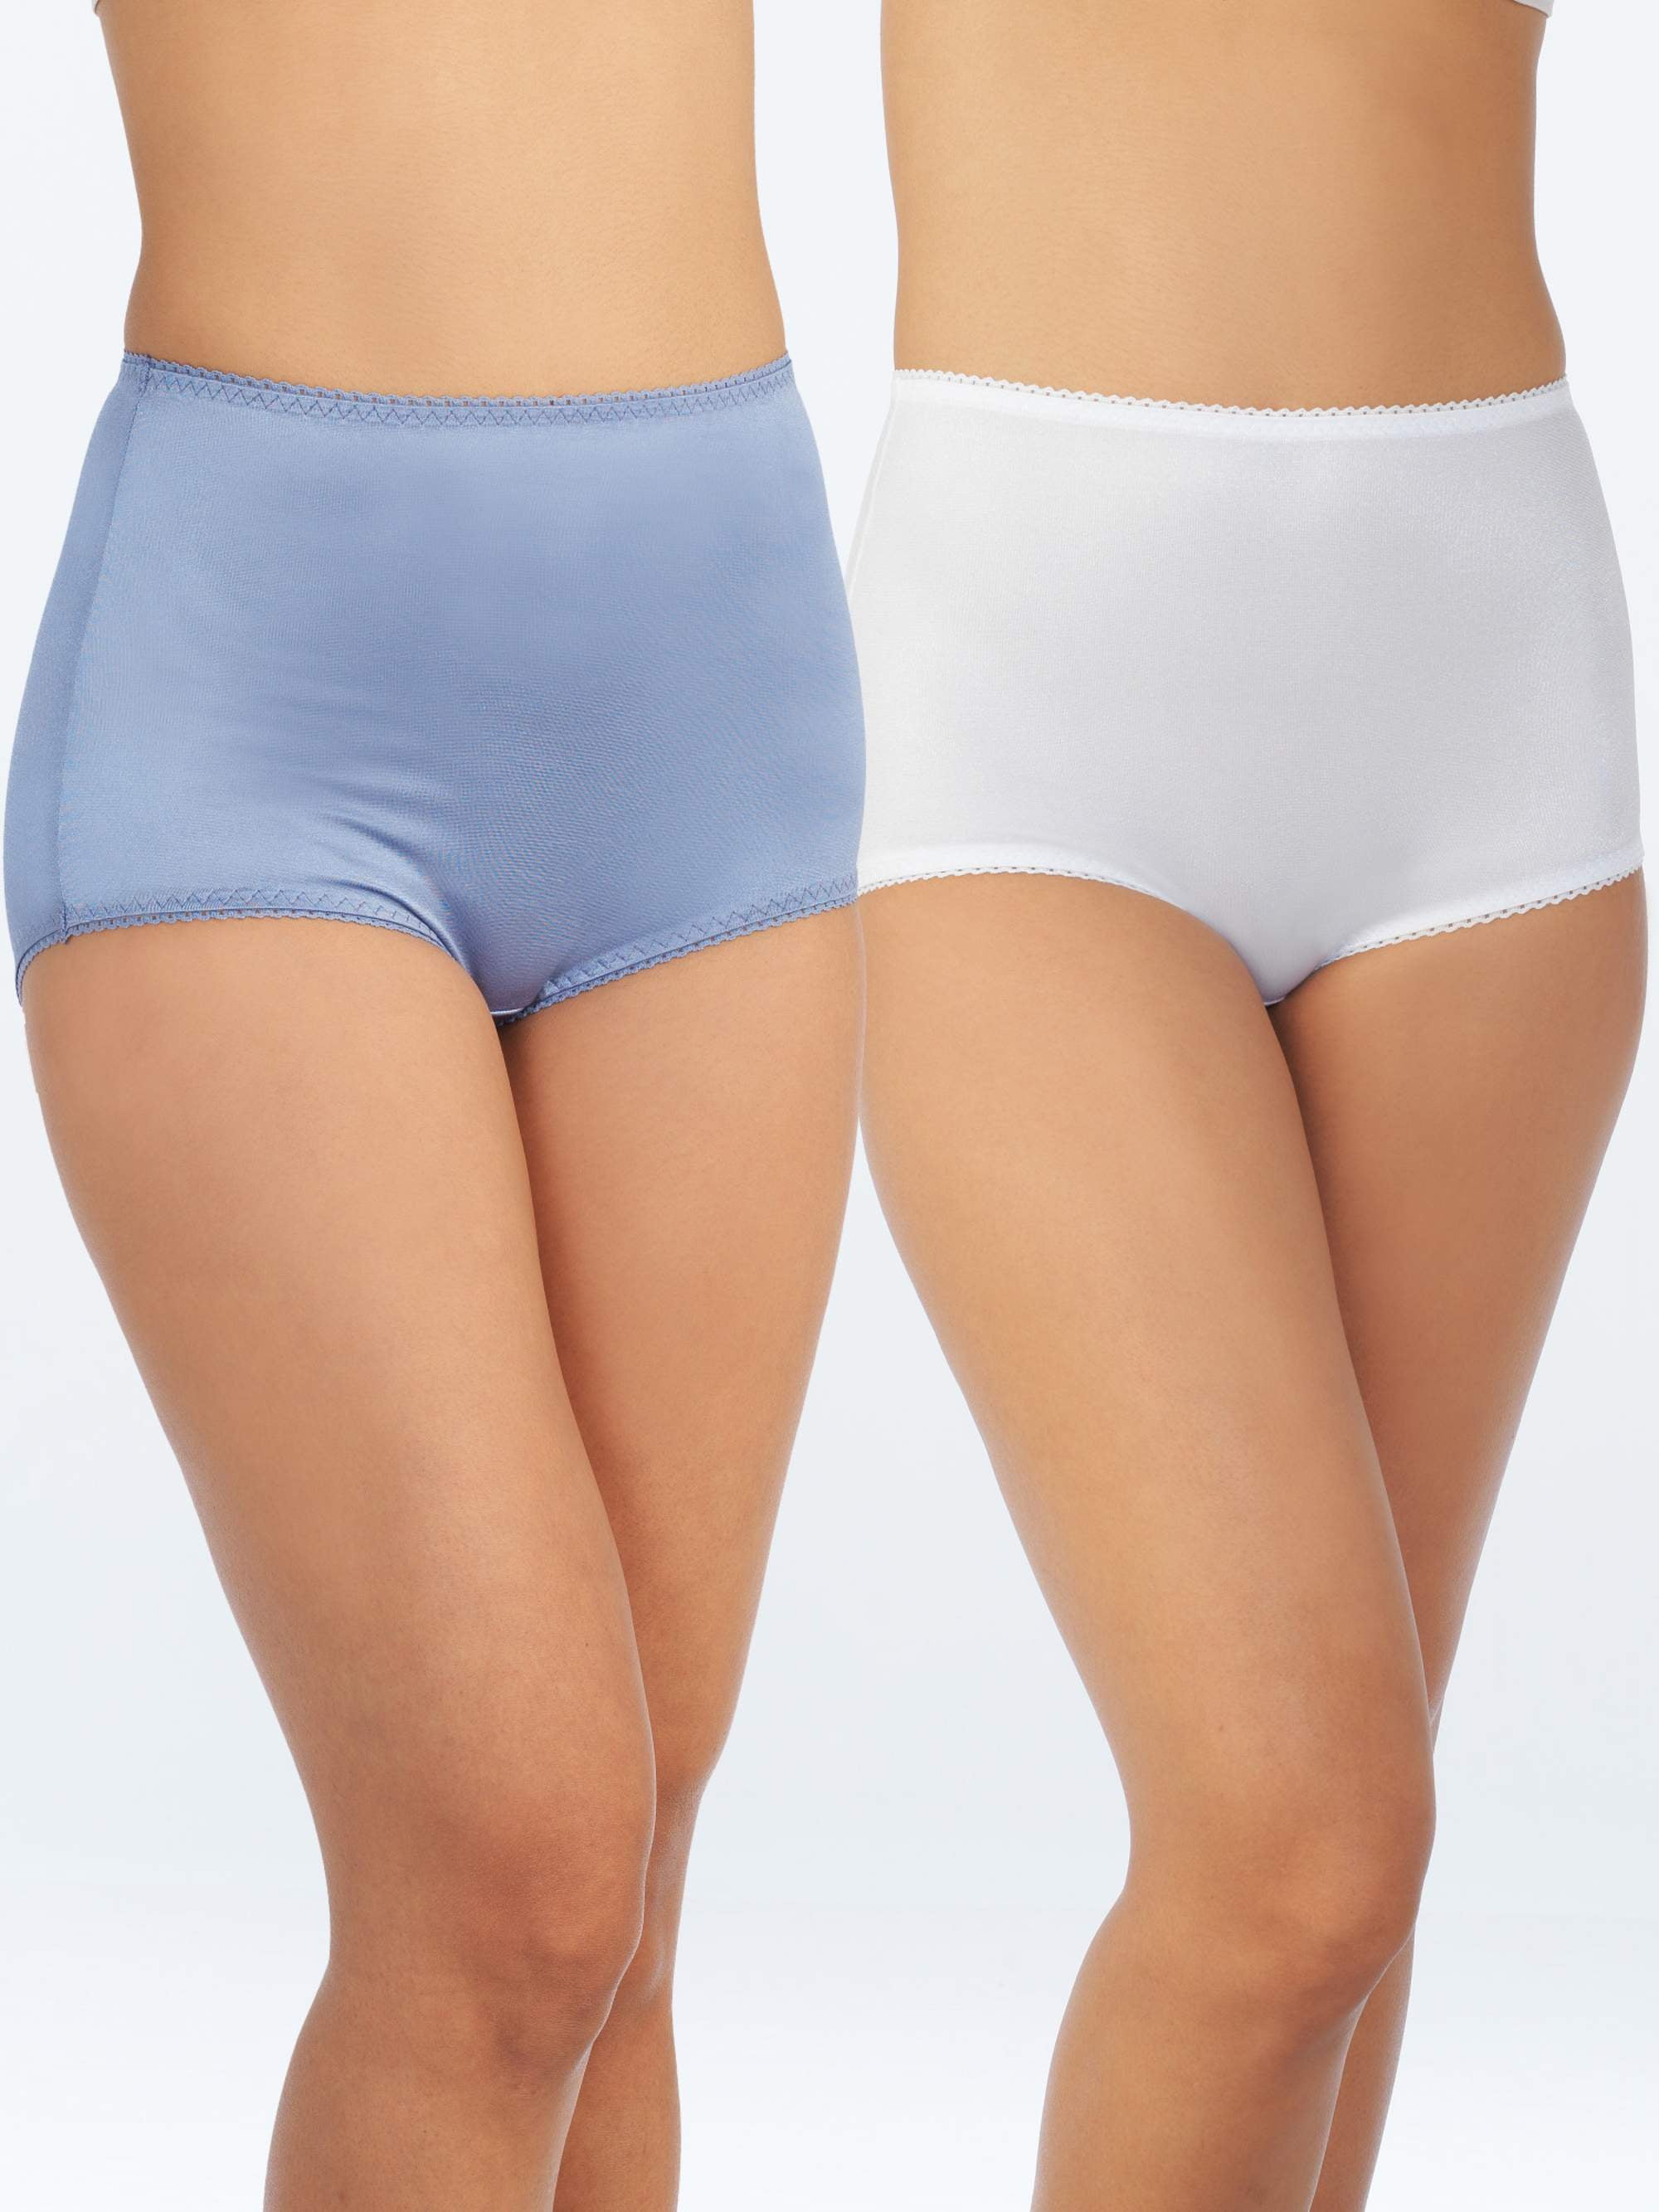 Women's Undershapers Light Control Briefs, 2 Pack, Style 40201 